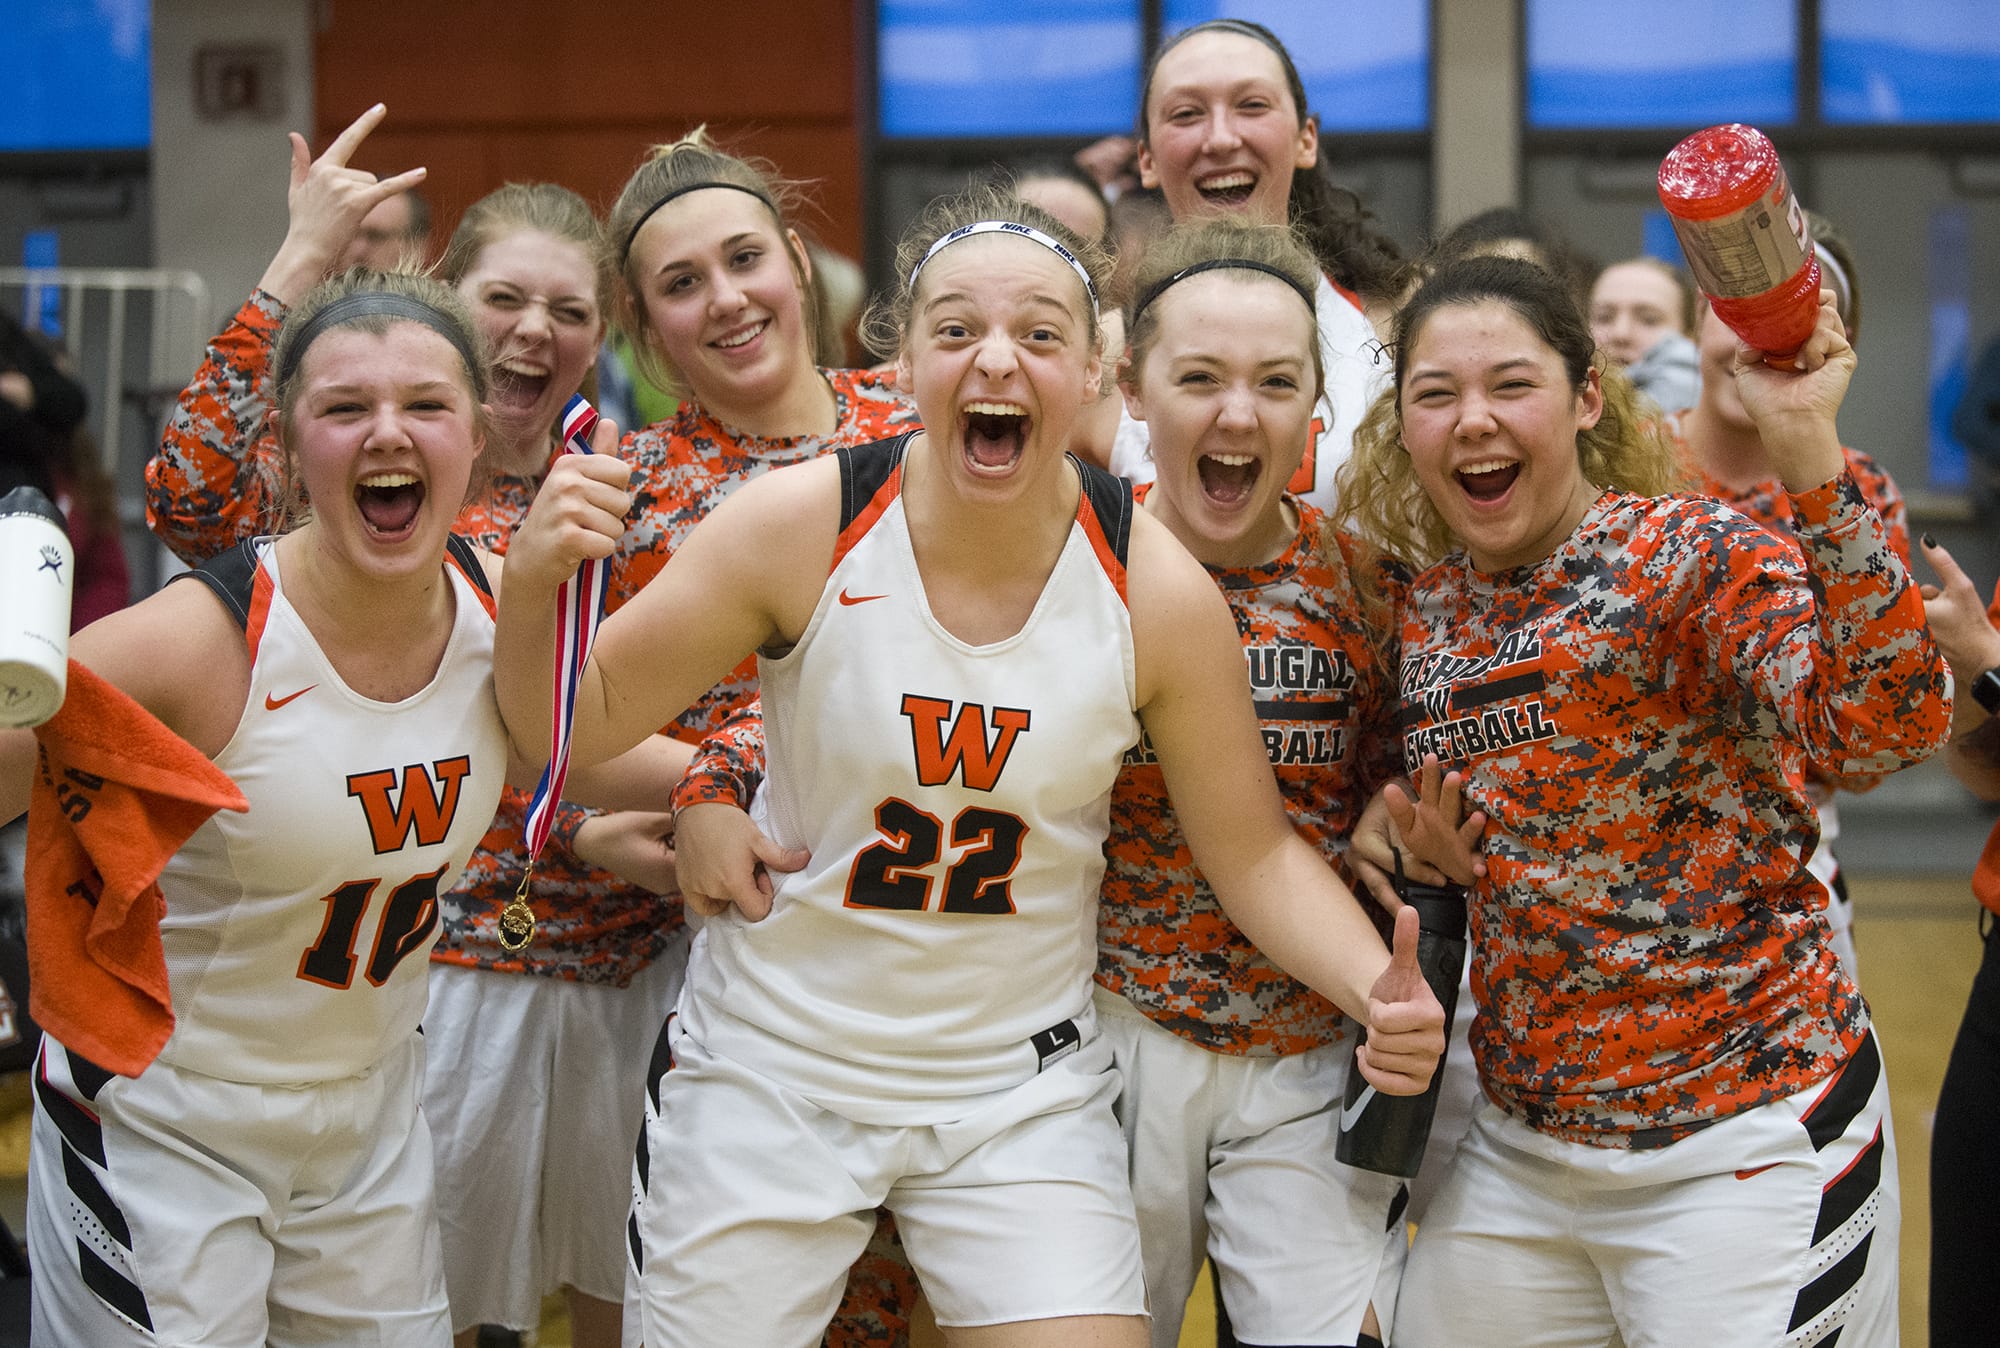 Washougal girls basketball players scream with excitement after receiving their medal for winning the 2A regional girls basketball game against Fife at Battle Ground High School, Saturday February 24, 2018.